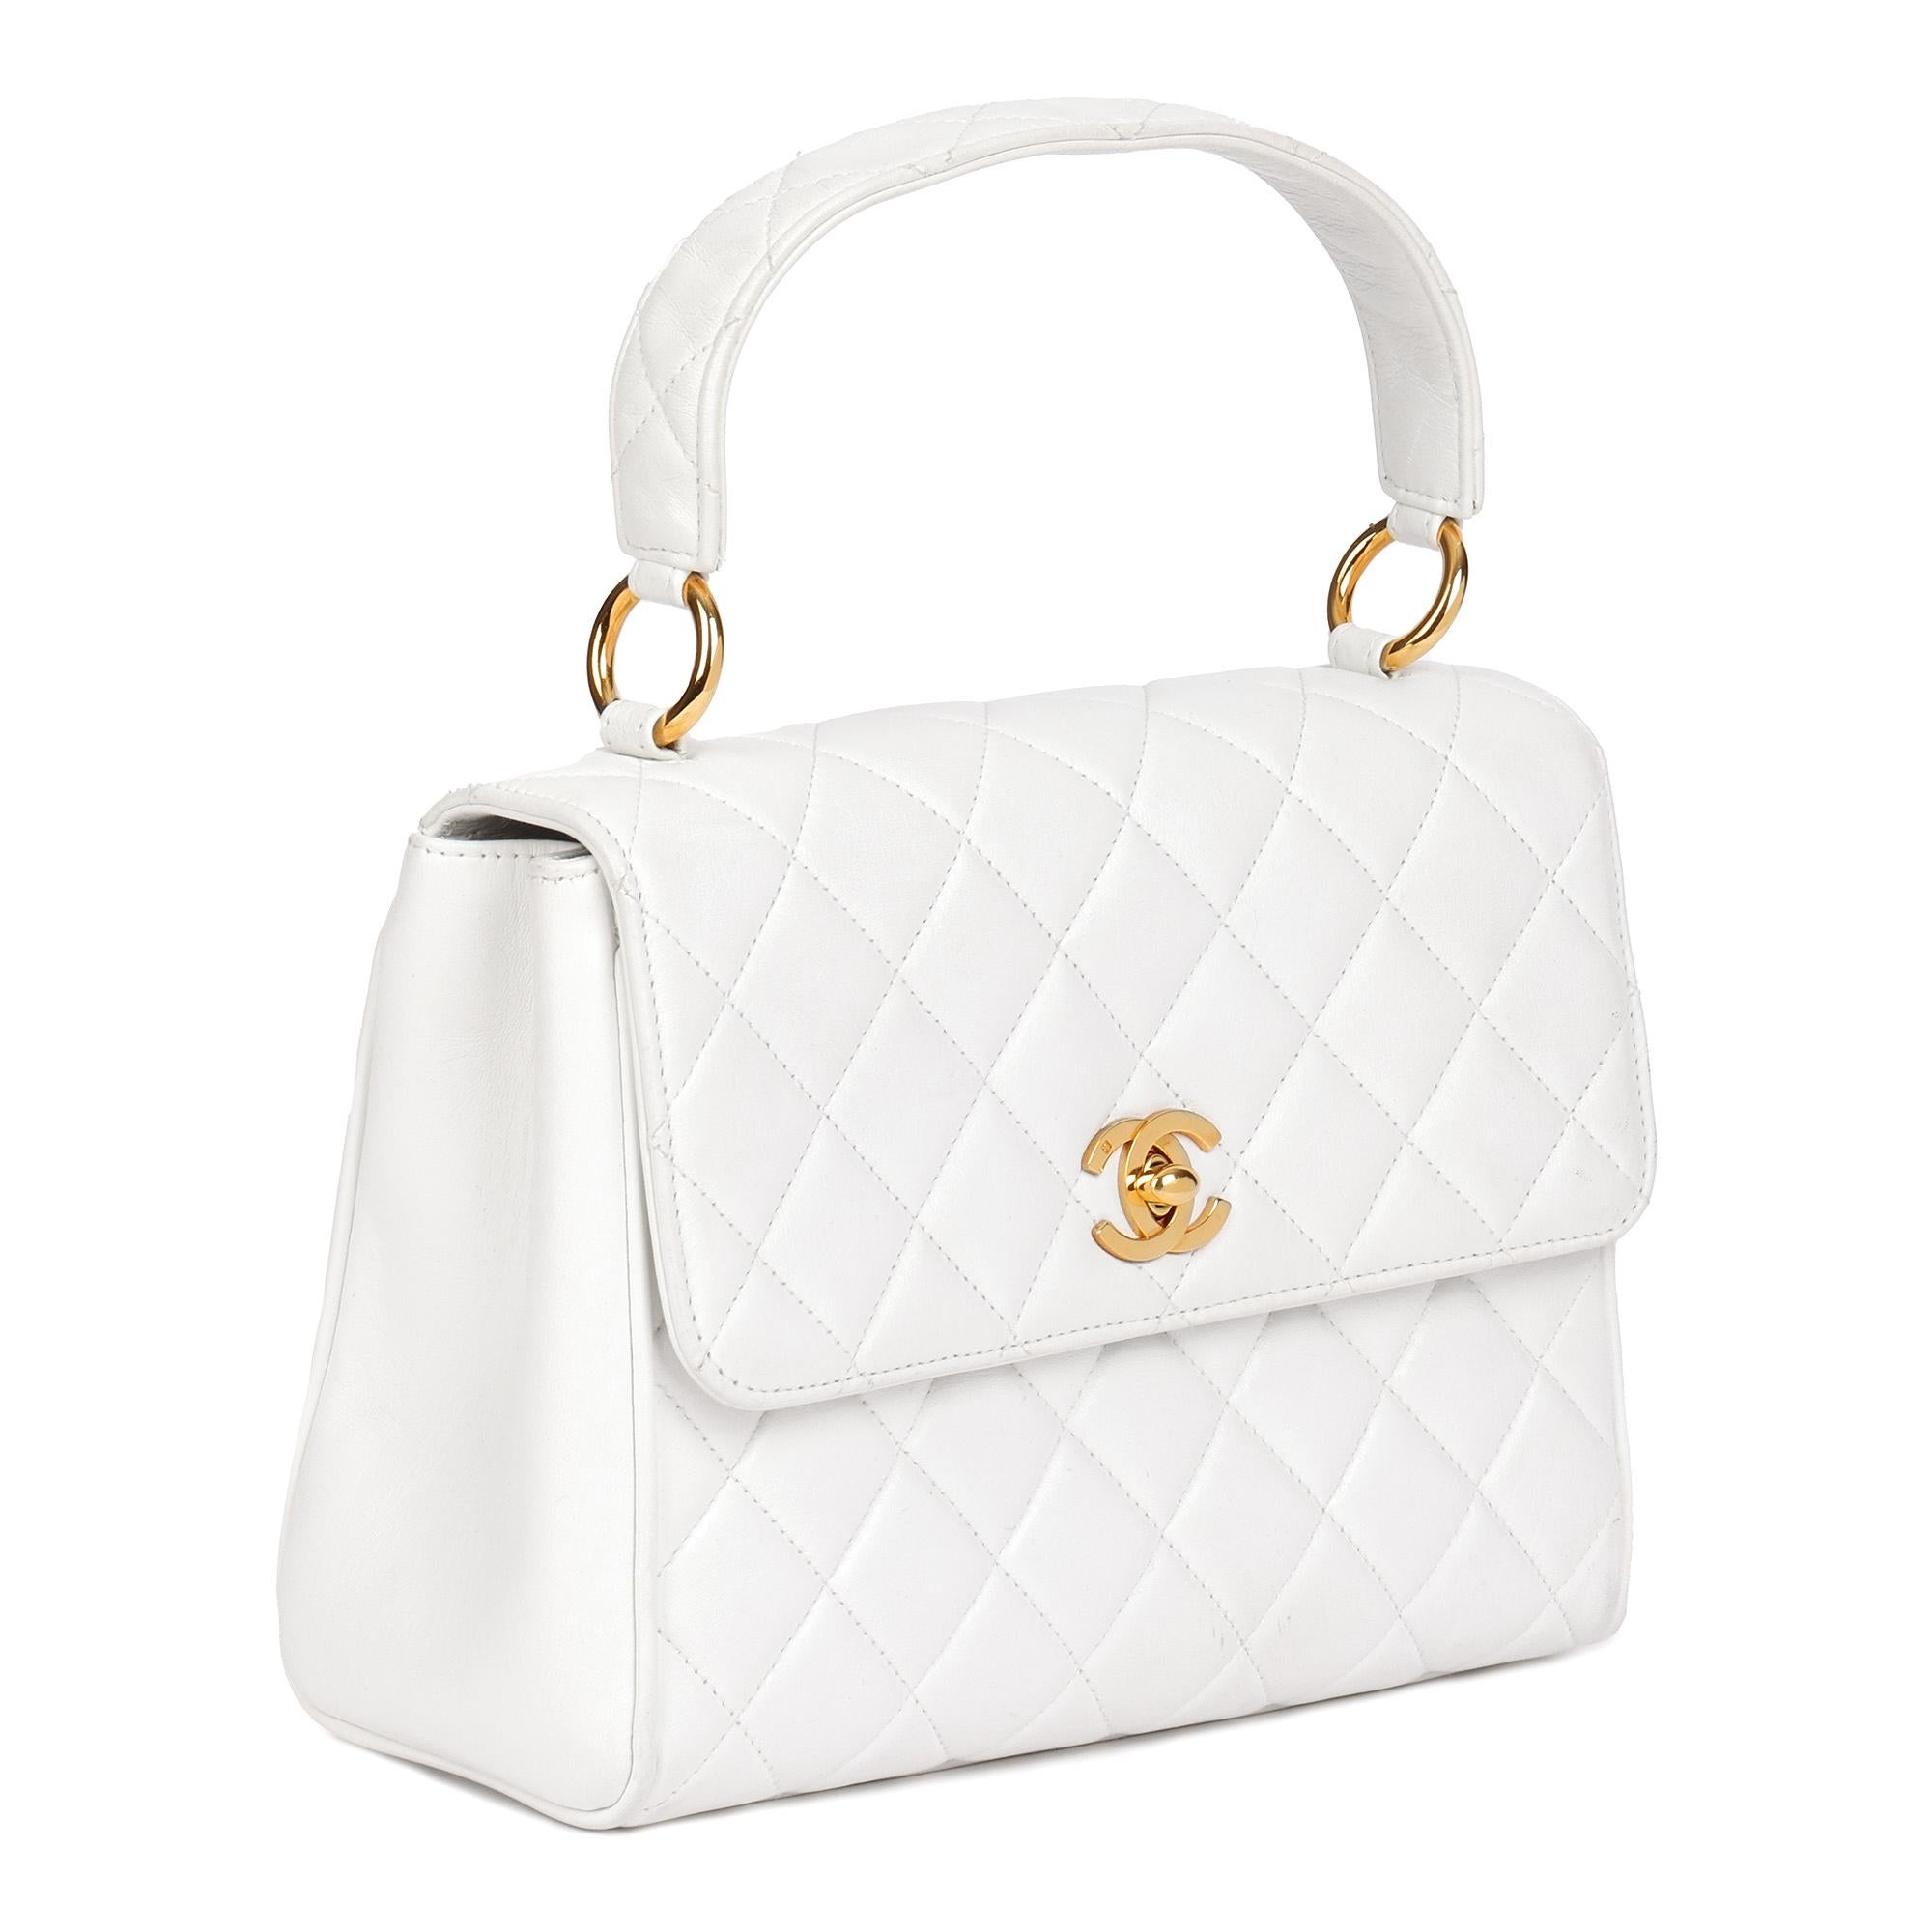 CHANEL
White Quilted Lambskin Vintage Classic Kelly

Serial Number: 4798358
Age (Circa): 1997
Accompanied By: Chanel Dust Bag
Authenticity Details: Serial Sticker (Made in France)
Gender: Ladies
Type: Top Handle

Colour: White
Hardware: Gold (24k